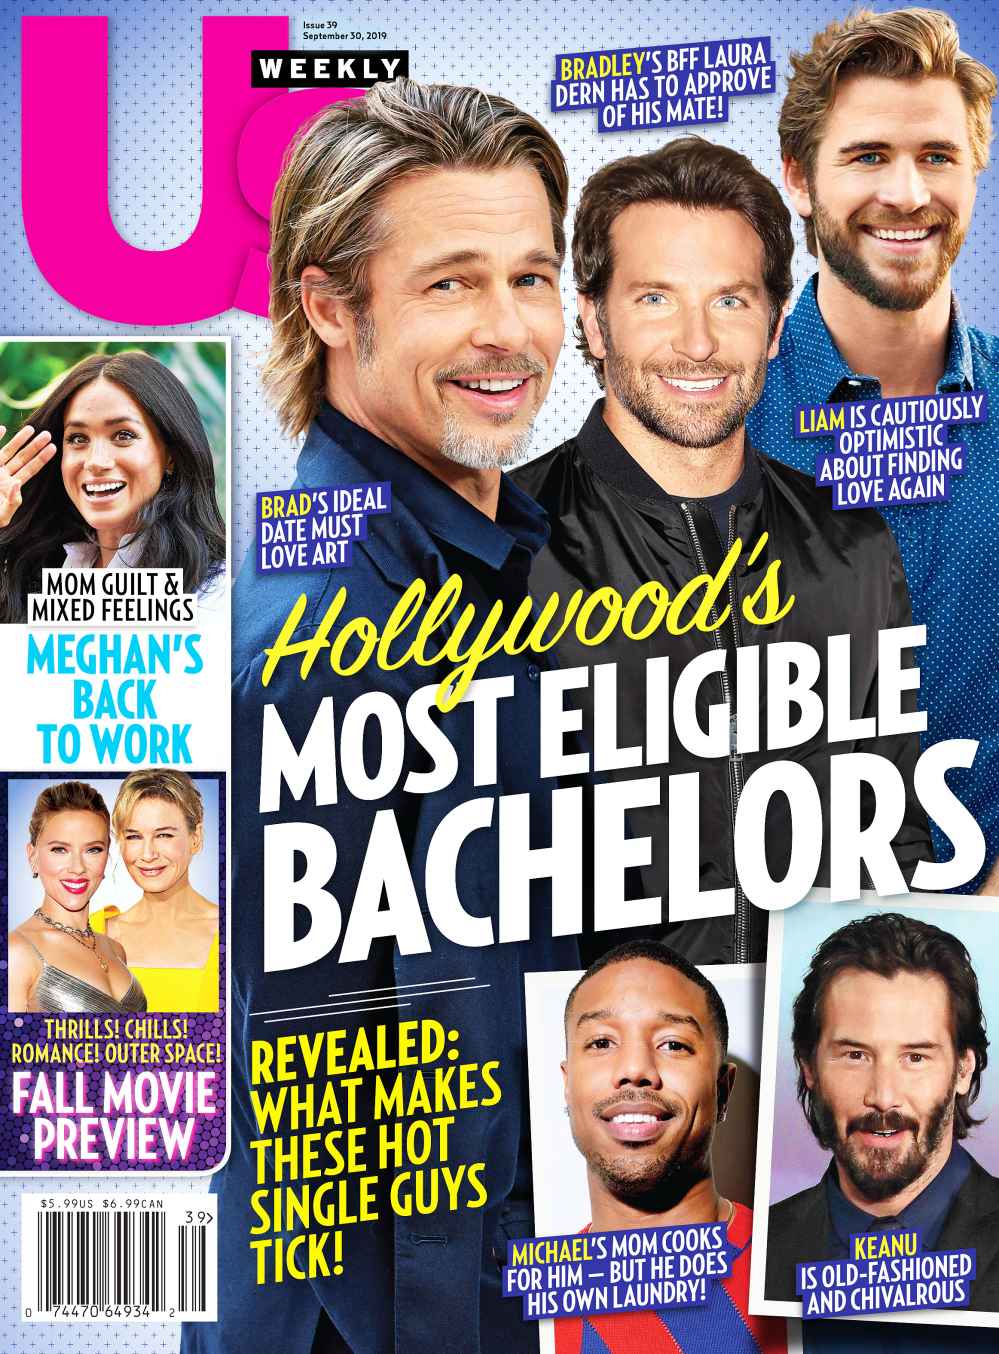 Us Weekly Cover Issue 3919 Hollywoods Most Eligible Bachelors